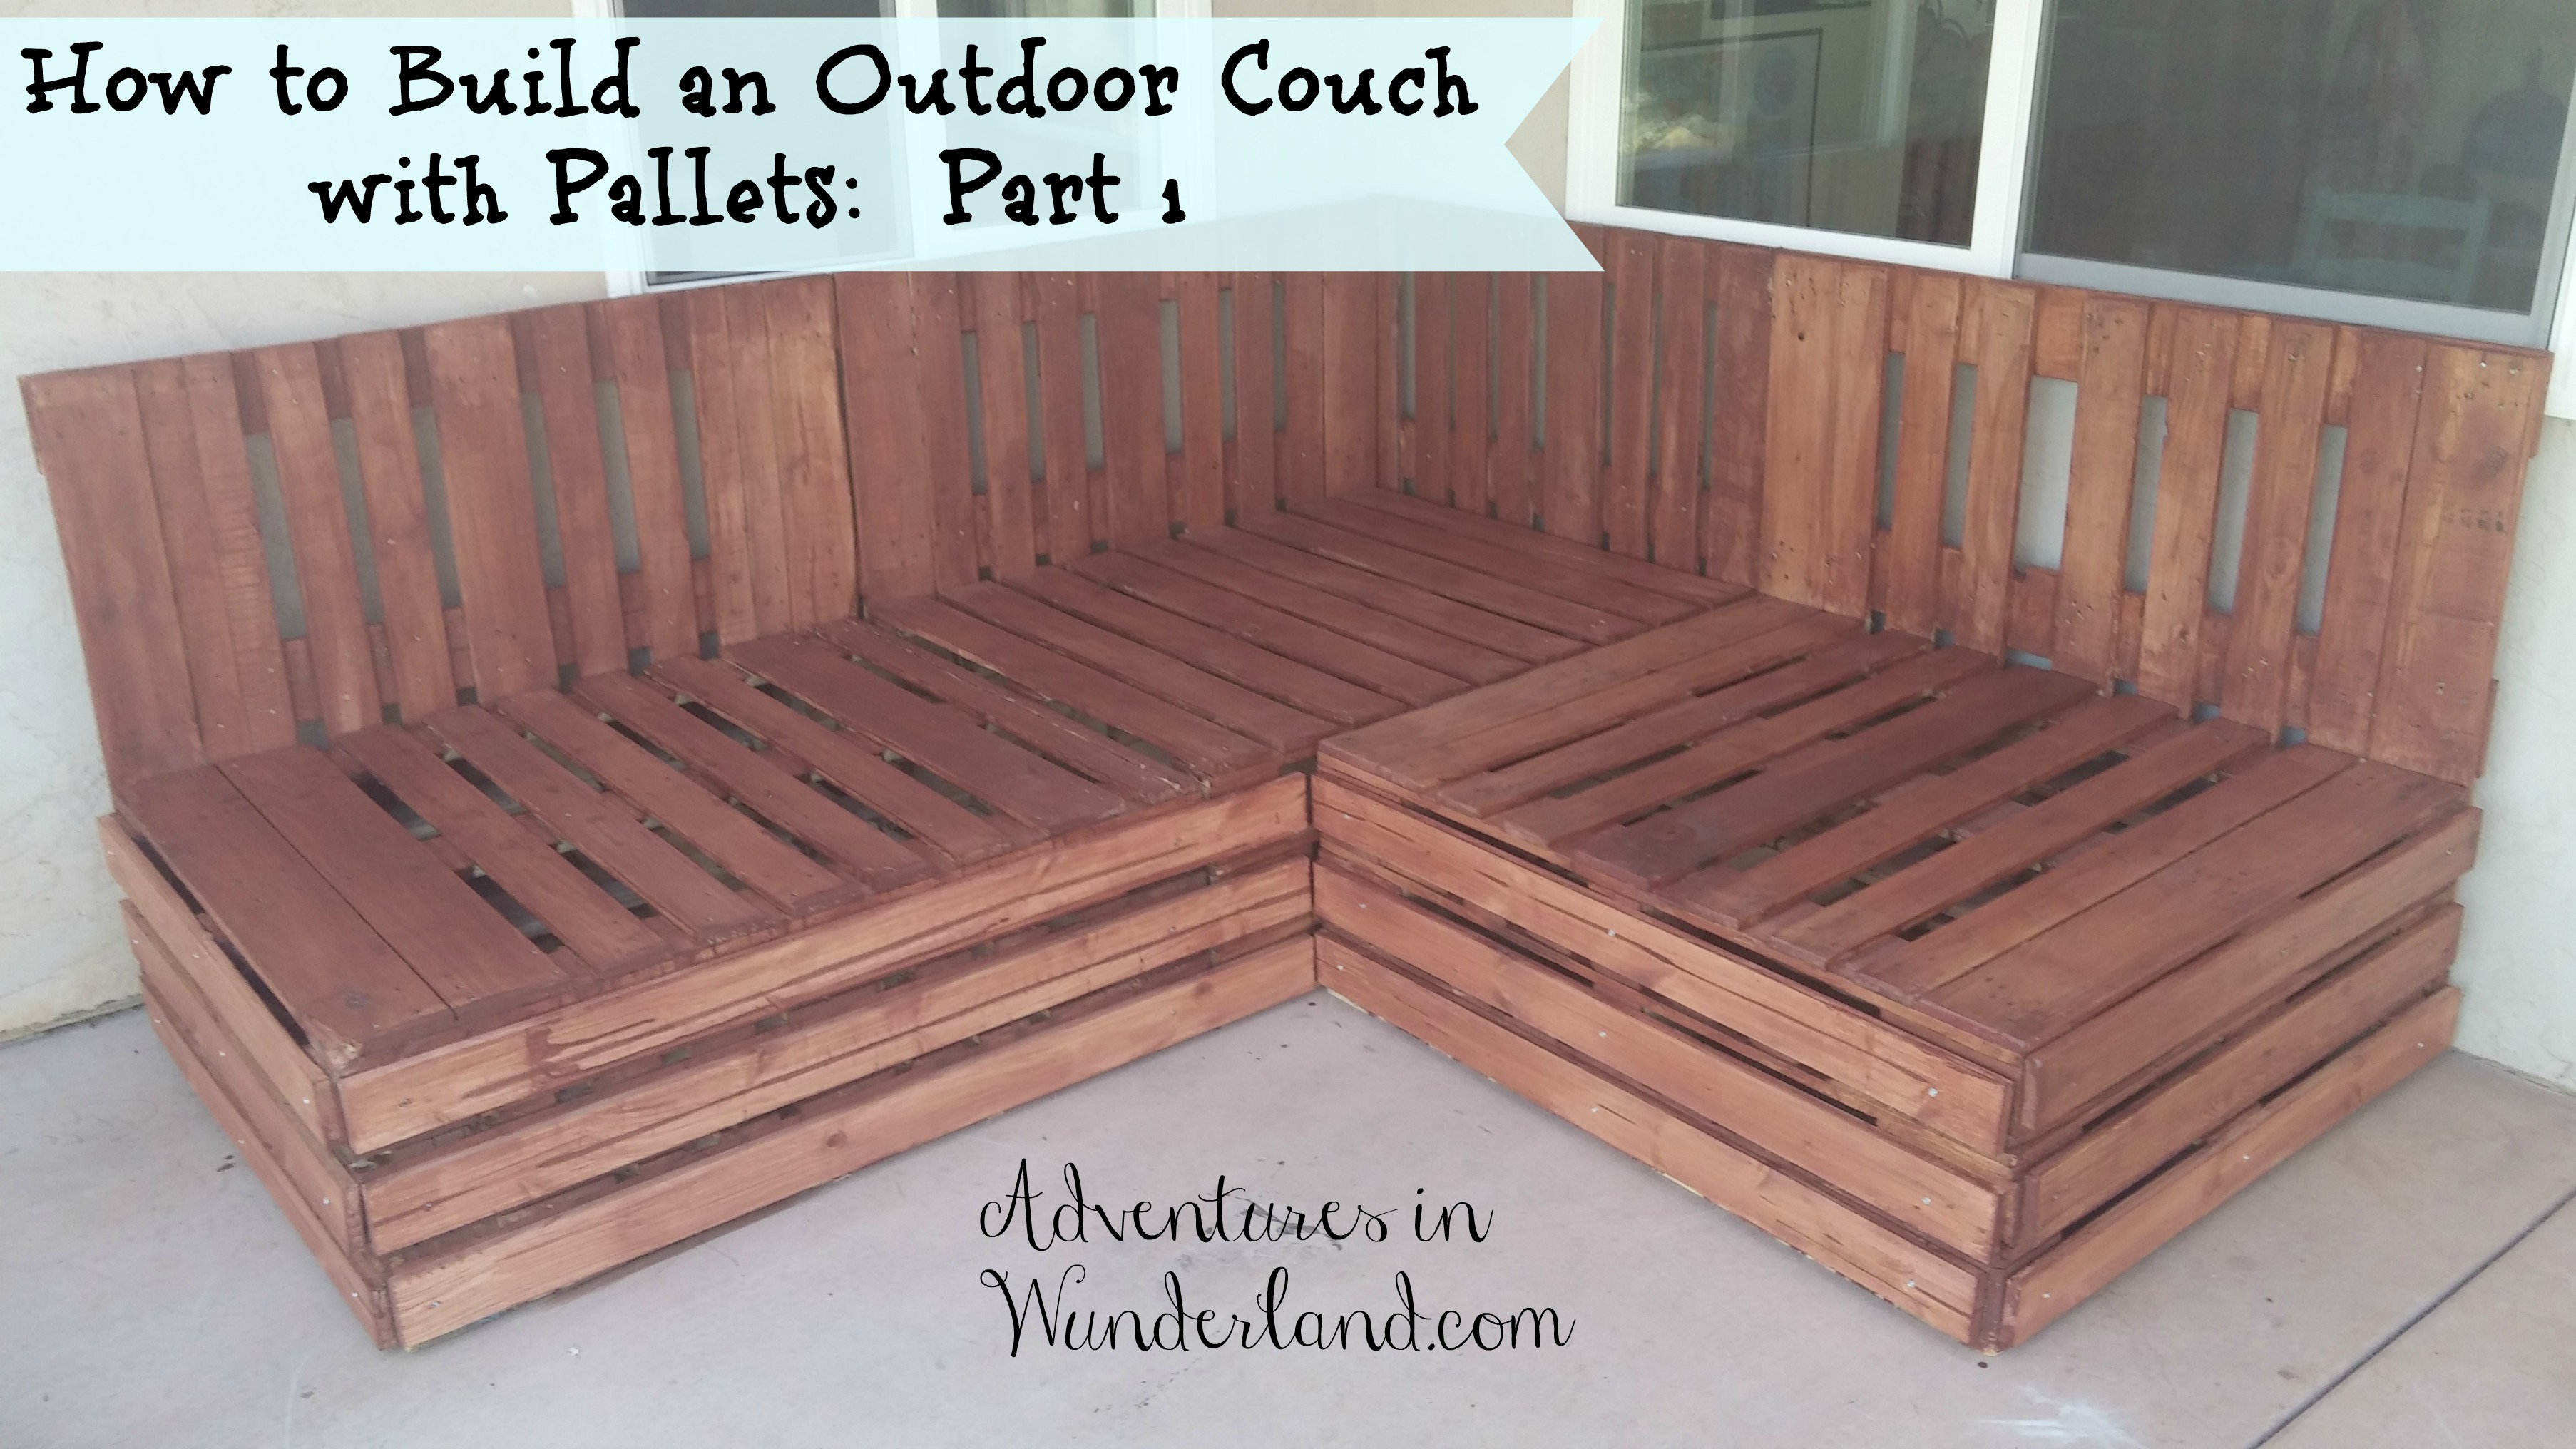 How to Build an Outdoor Couch with Pallets:  Part 1